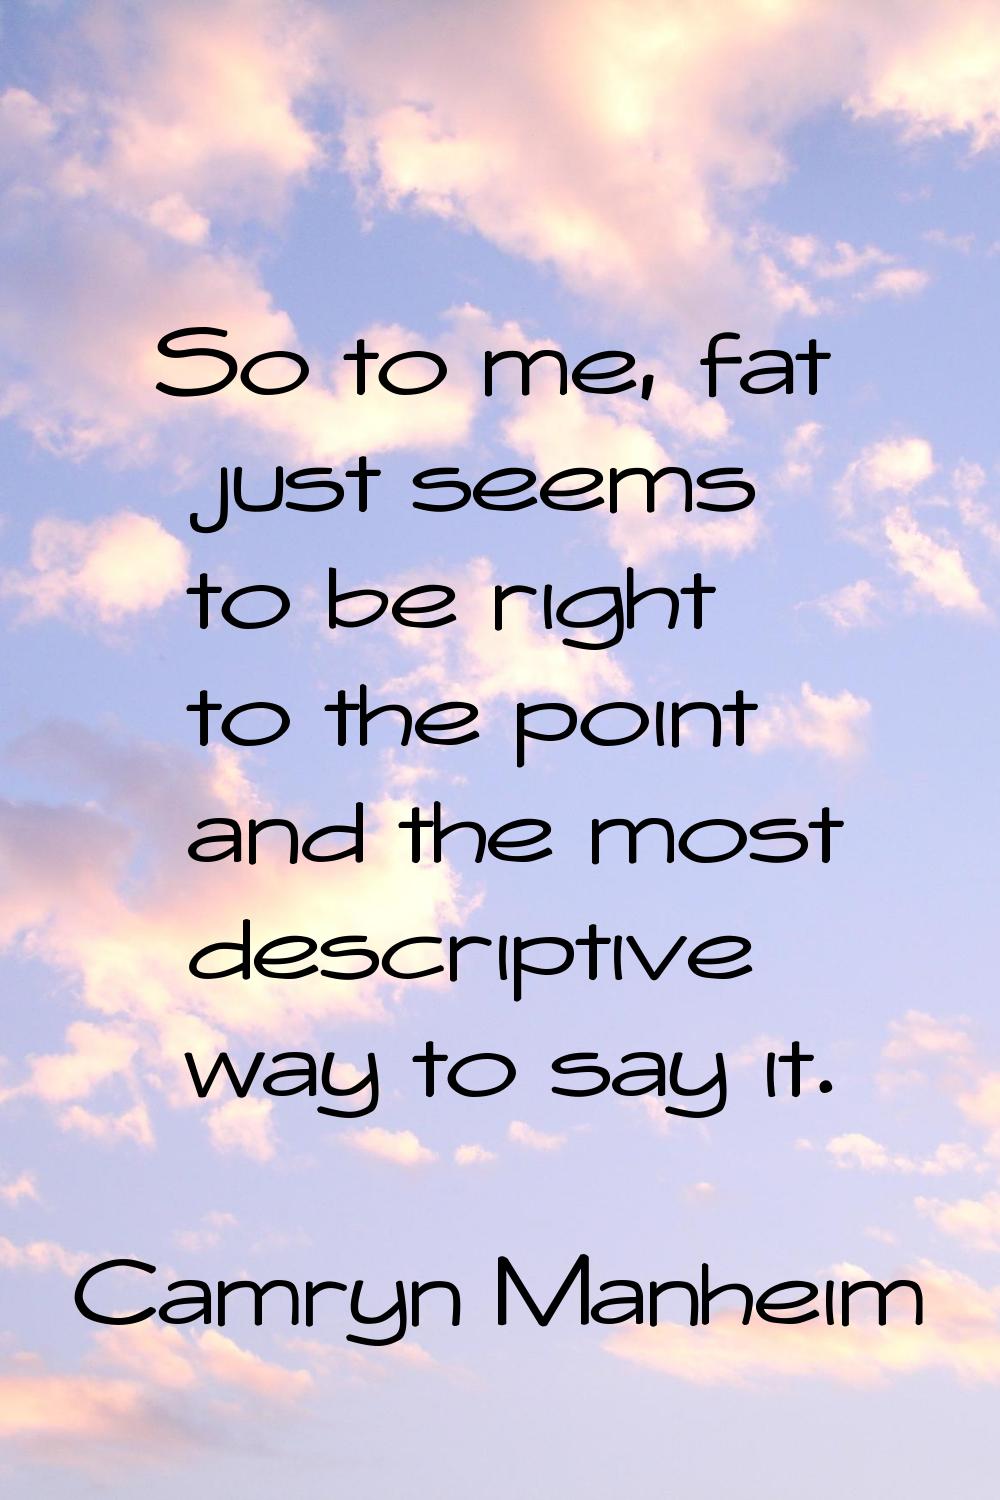 So to me, fat just seems to be right to the point and the most descriptive way to say it.